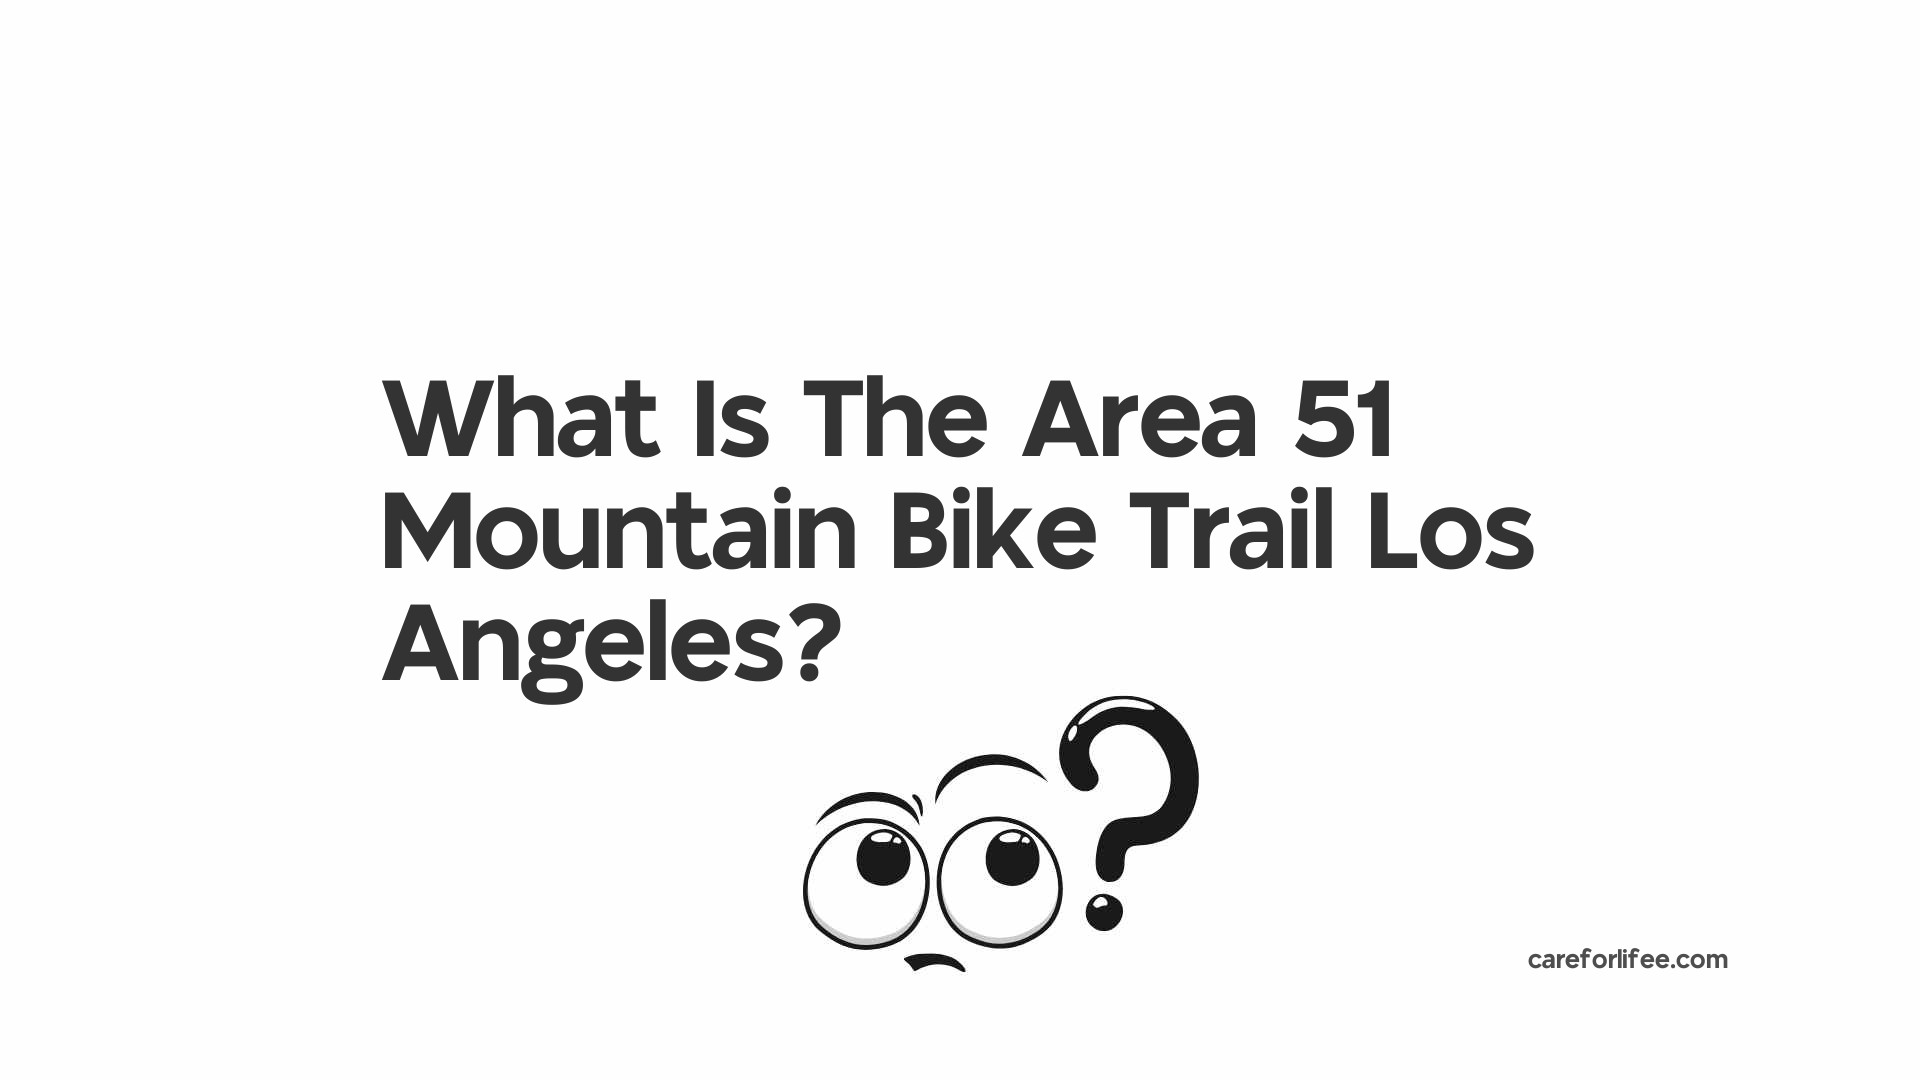 What Is The Area 51 Mountain Bike Trail Los Angeles?